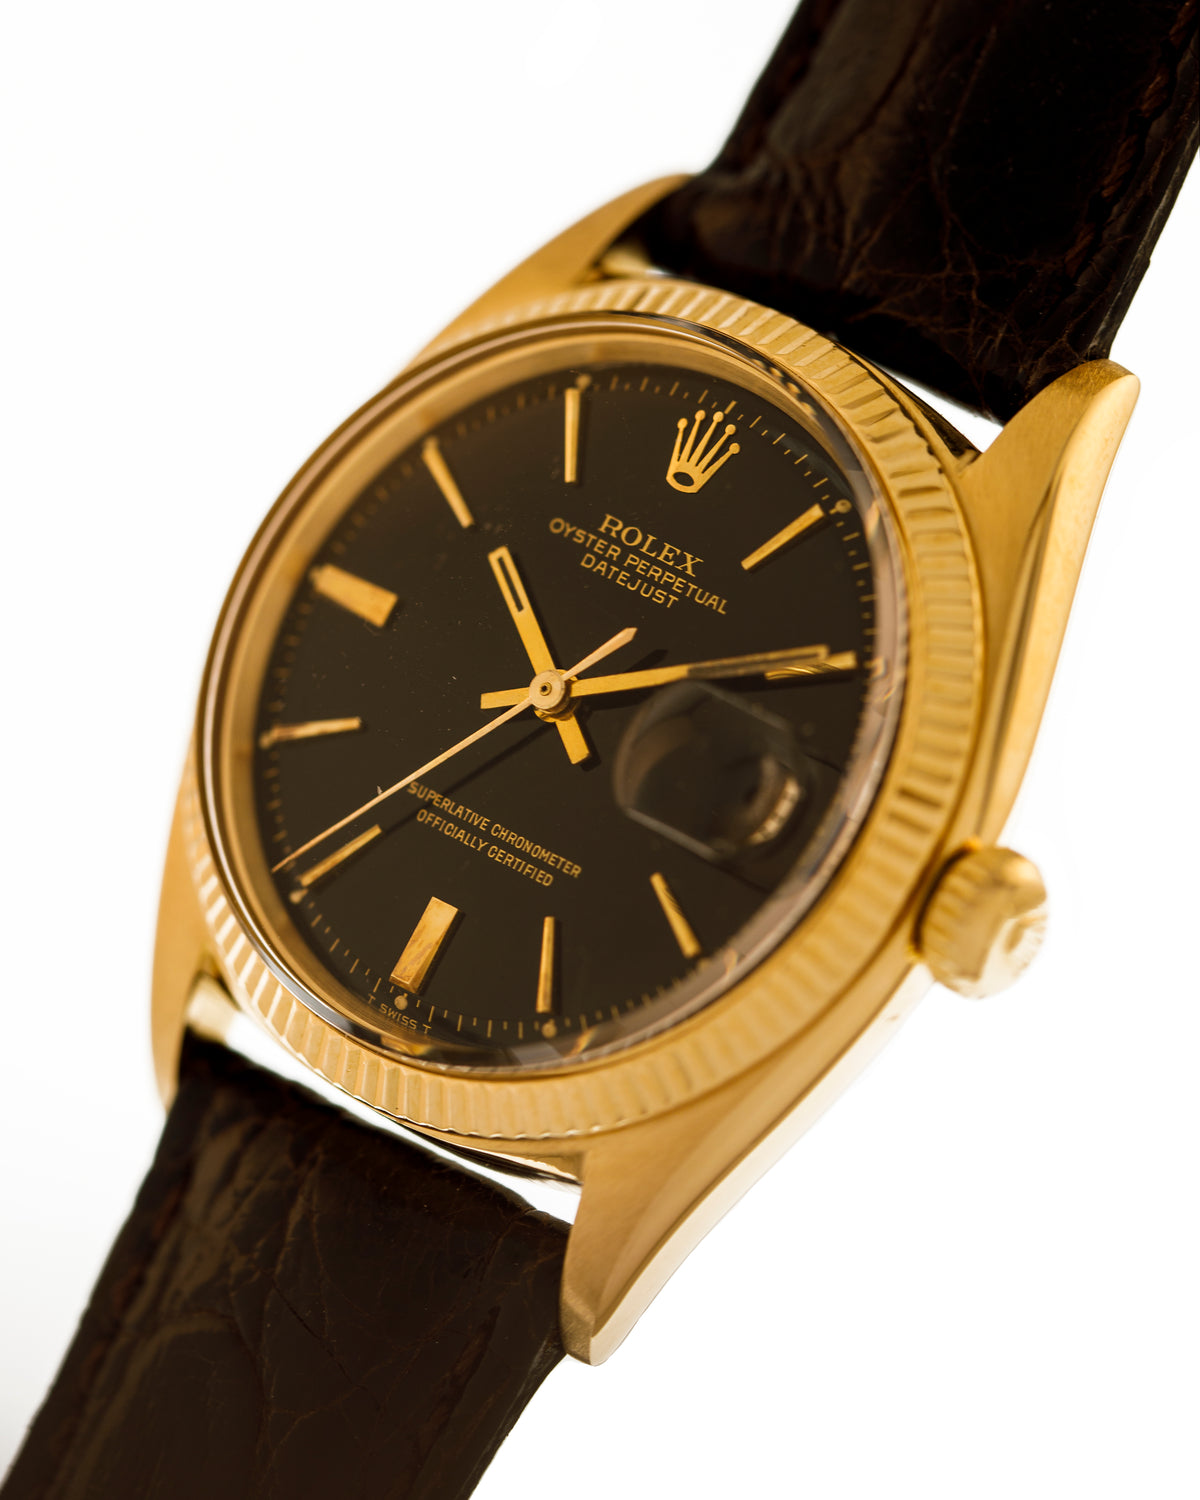 Rolex Oyster Perpetual Date just gilt dial